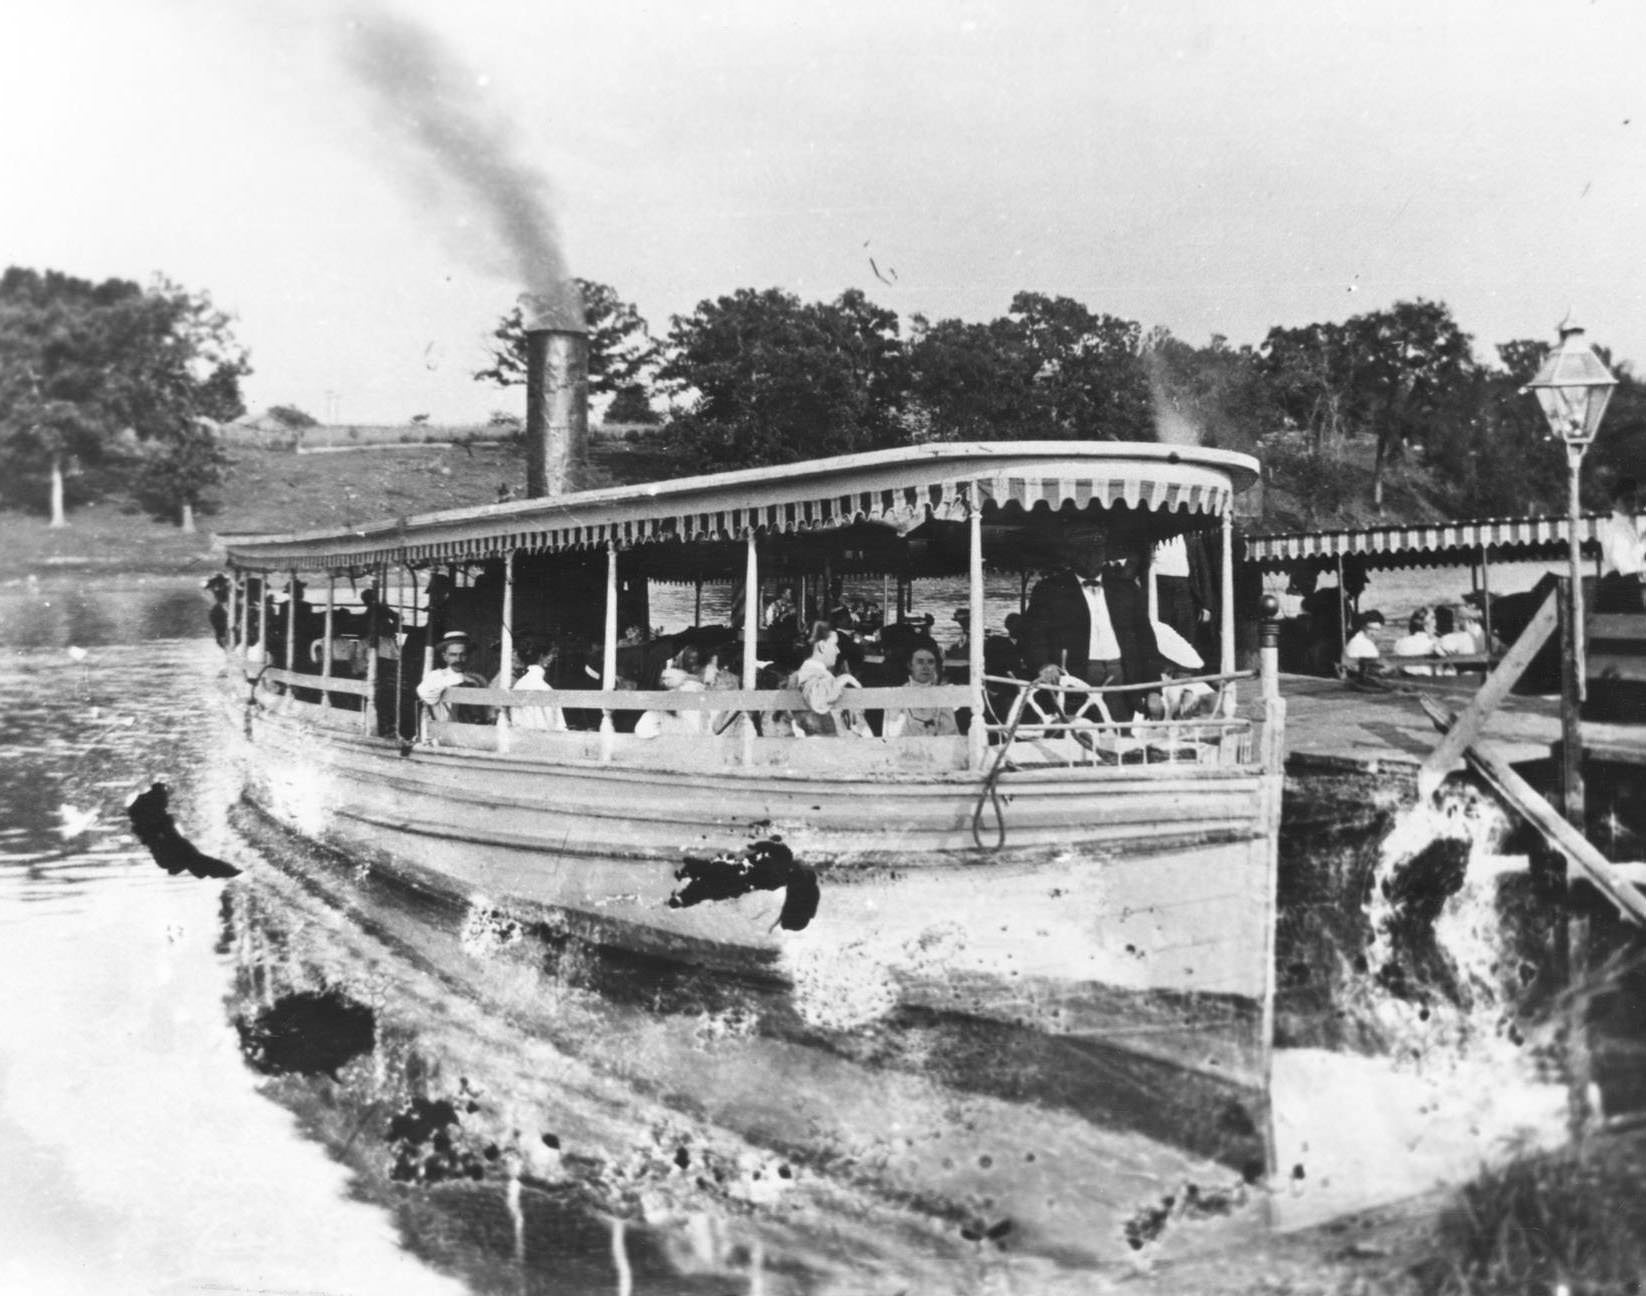 "Enterprise" steamboat and "Bower City Belle" boat on the Rock River, June 1884